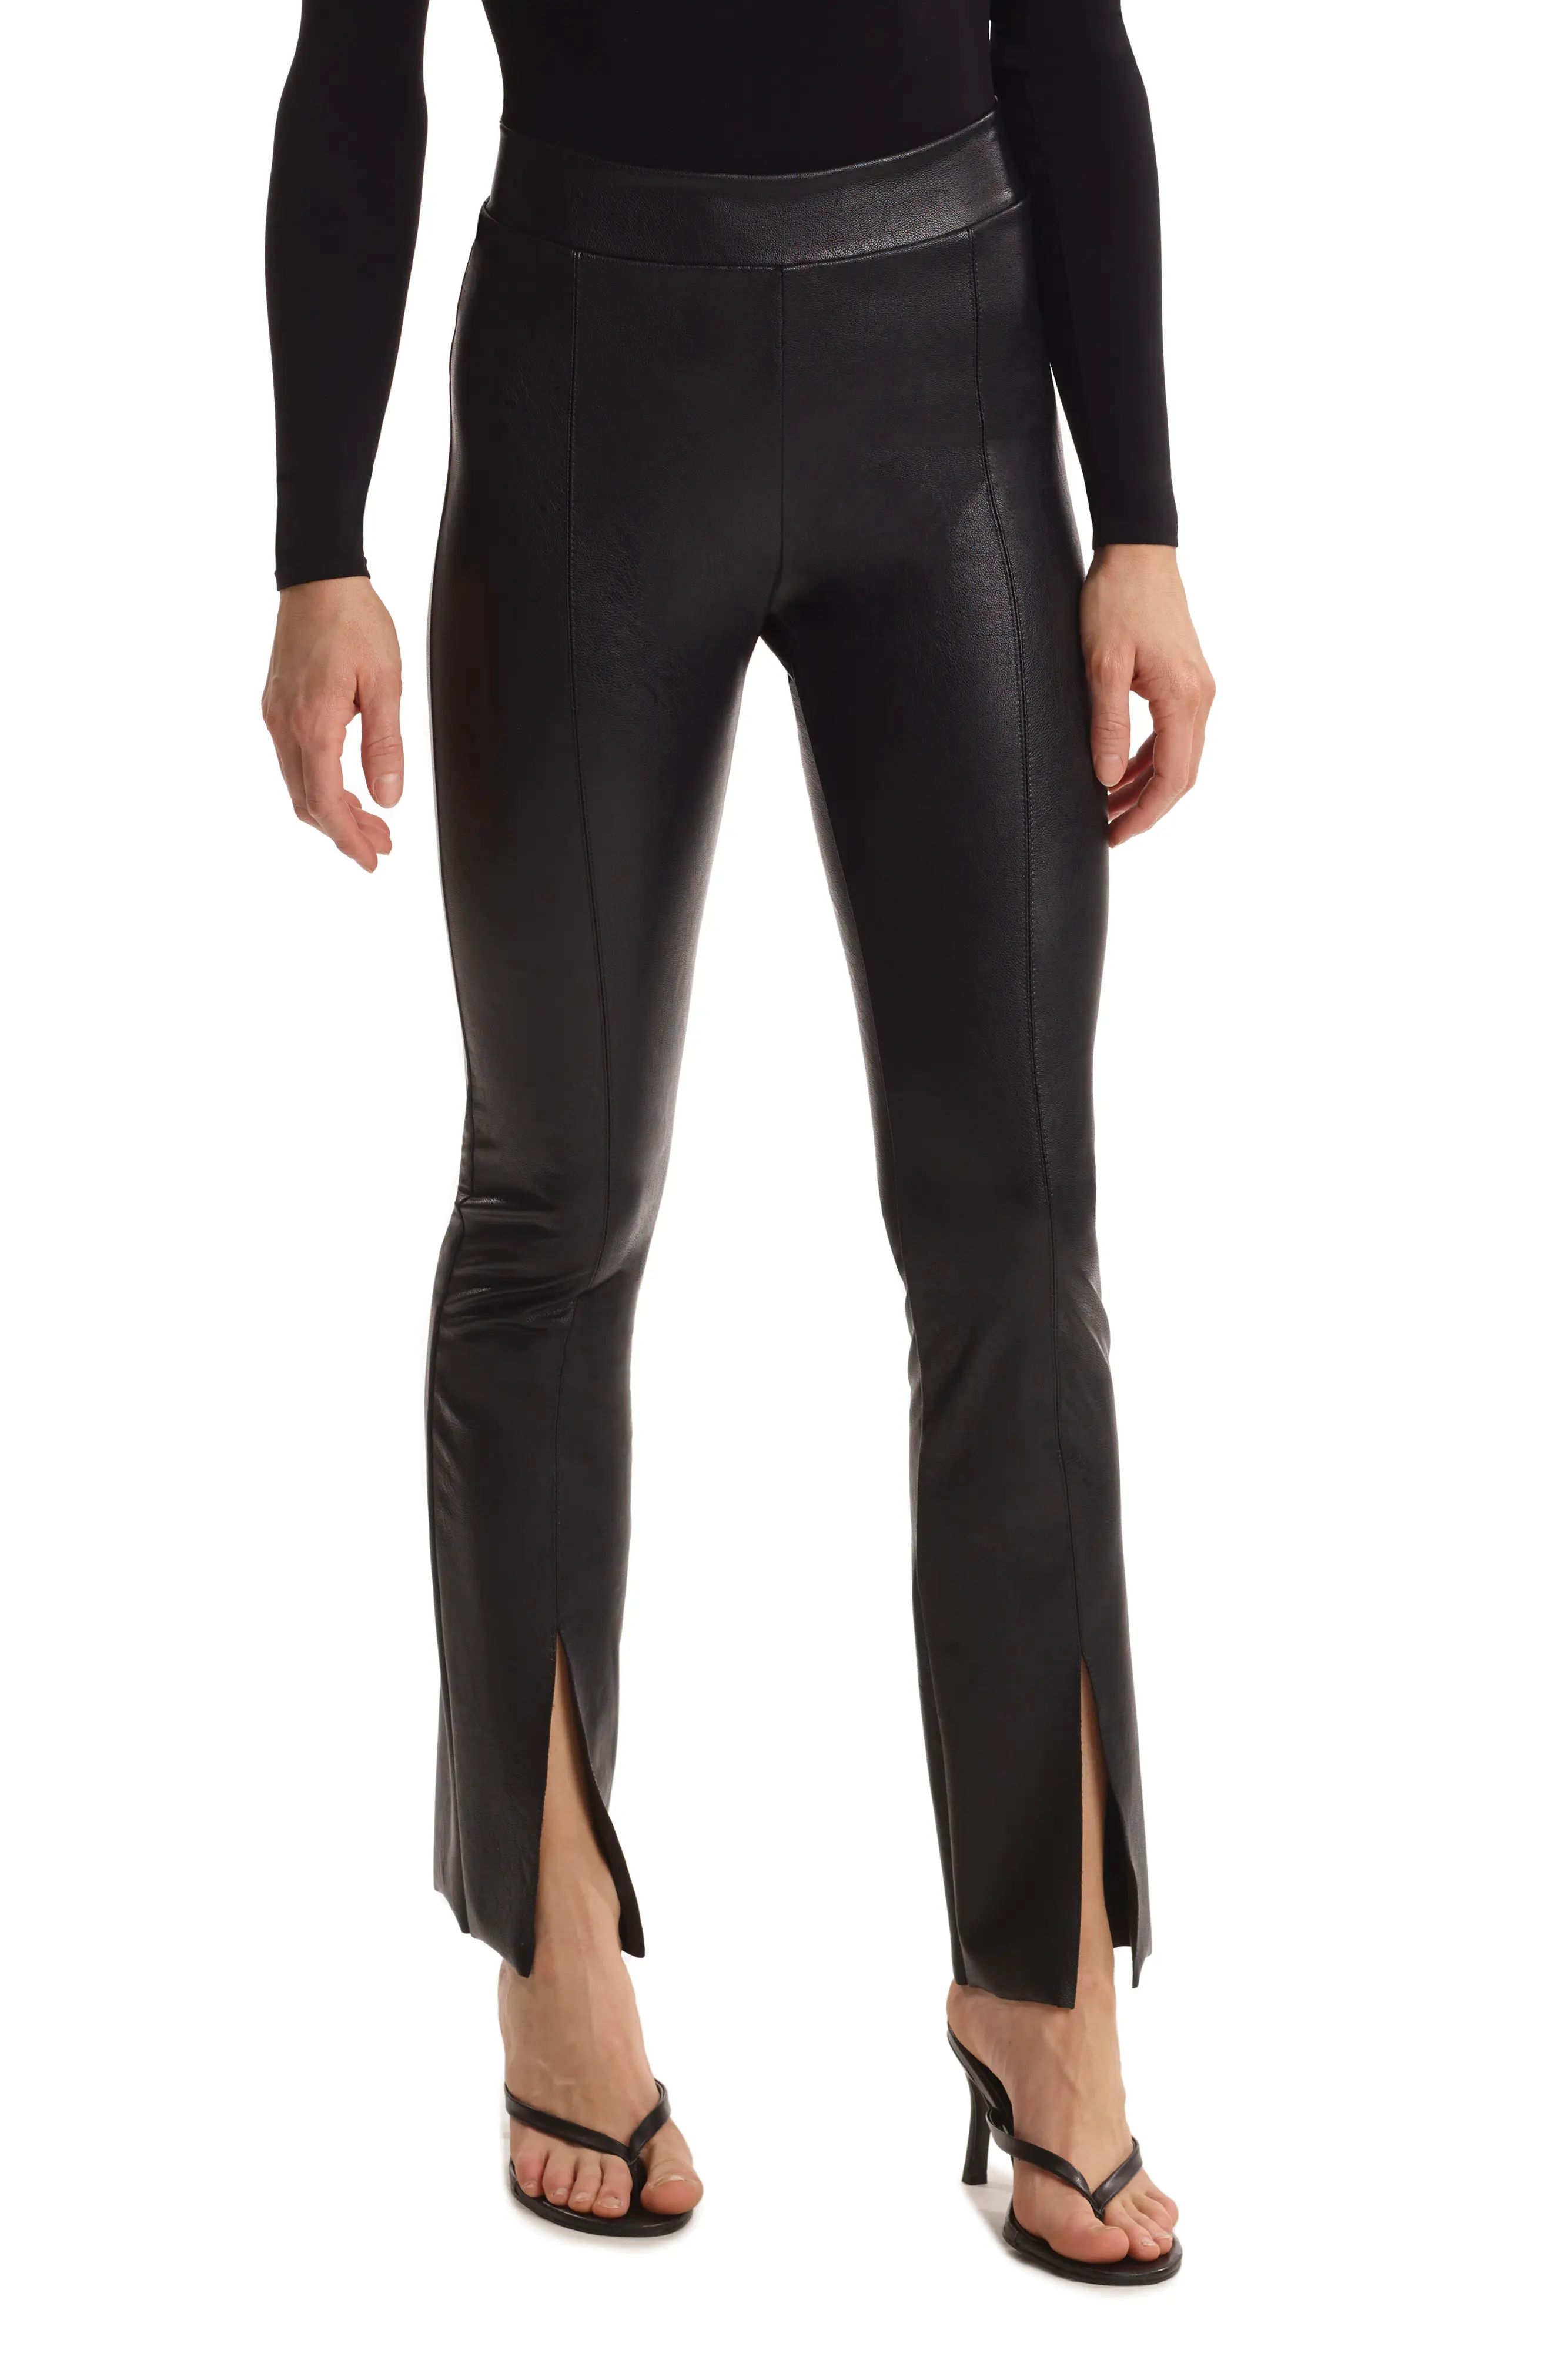 Commando Split Hem Faux Leather Pull-On Pants in Black at Nordstrom, Size Small | Nordstrom